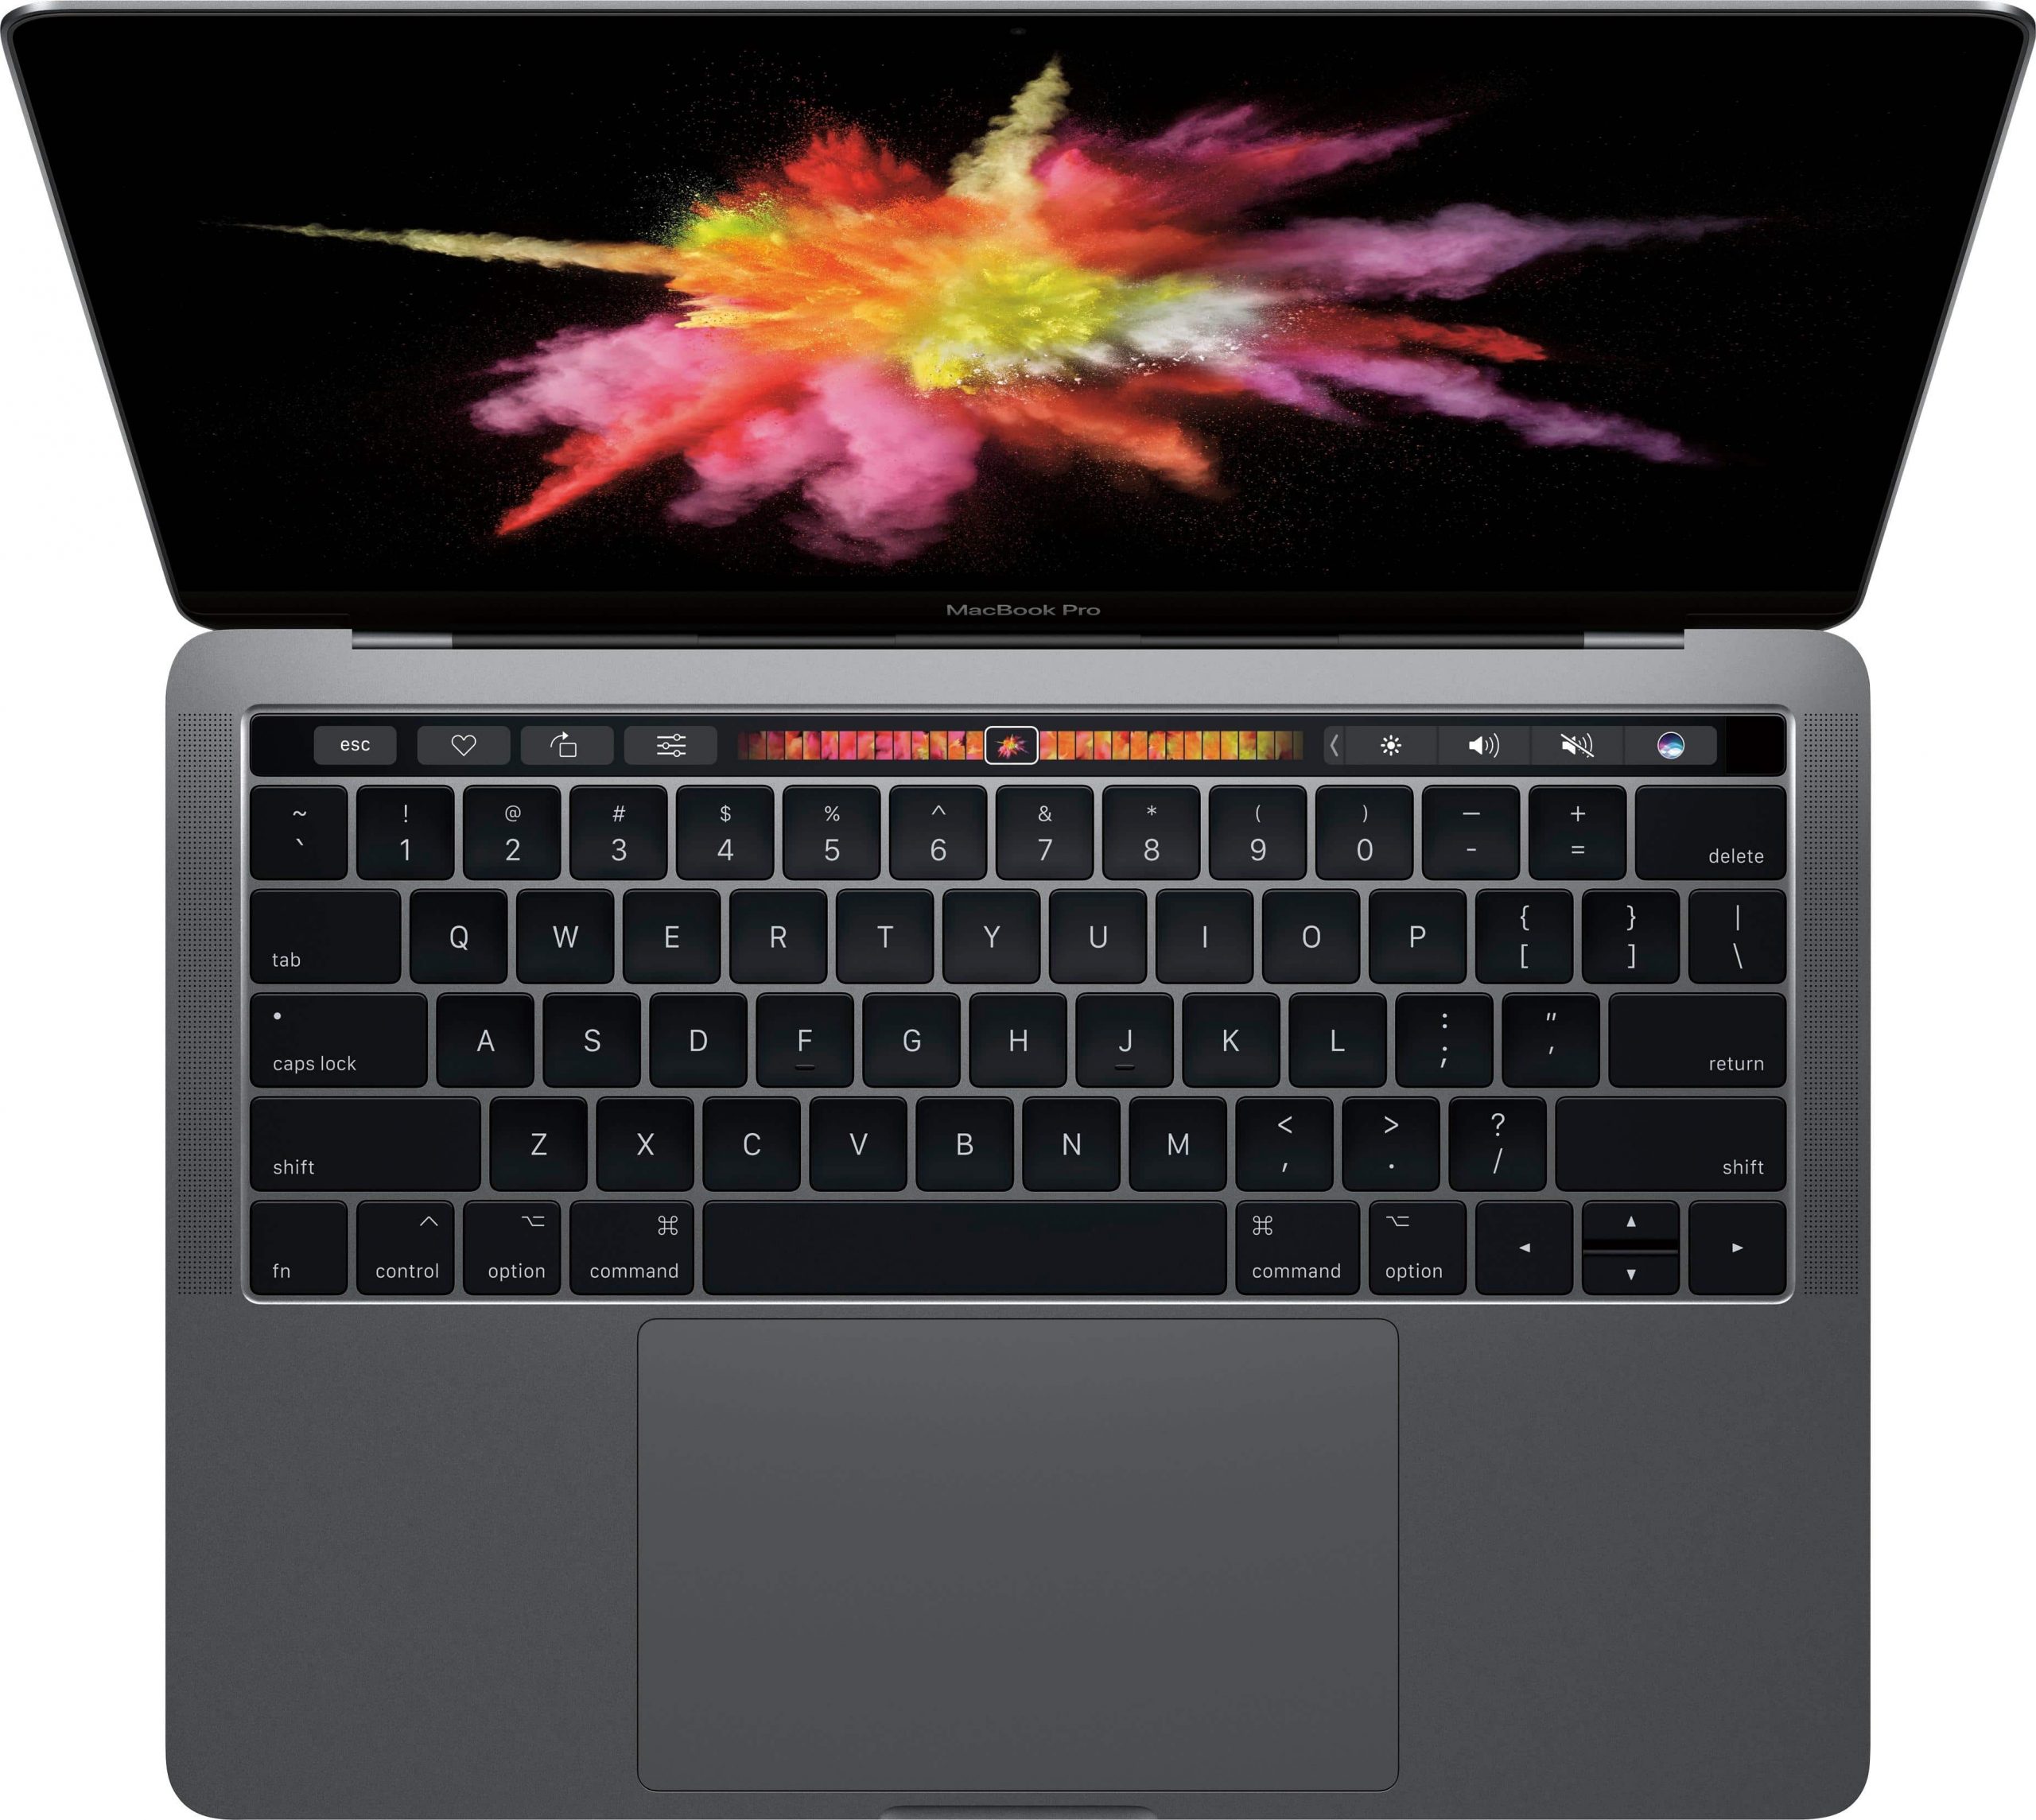 Apples new MacBook Pro with its latest features